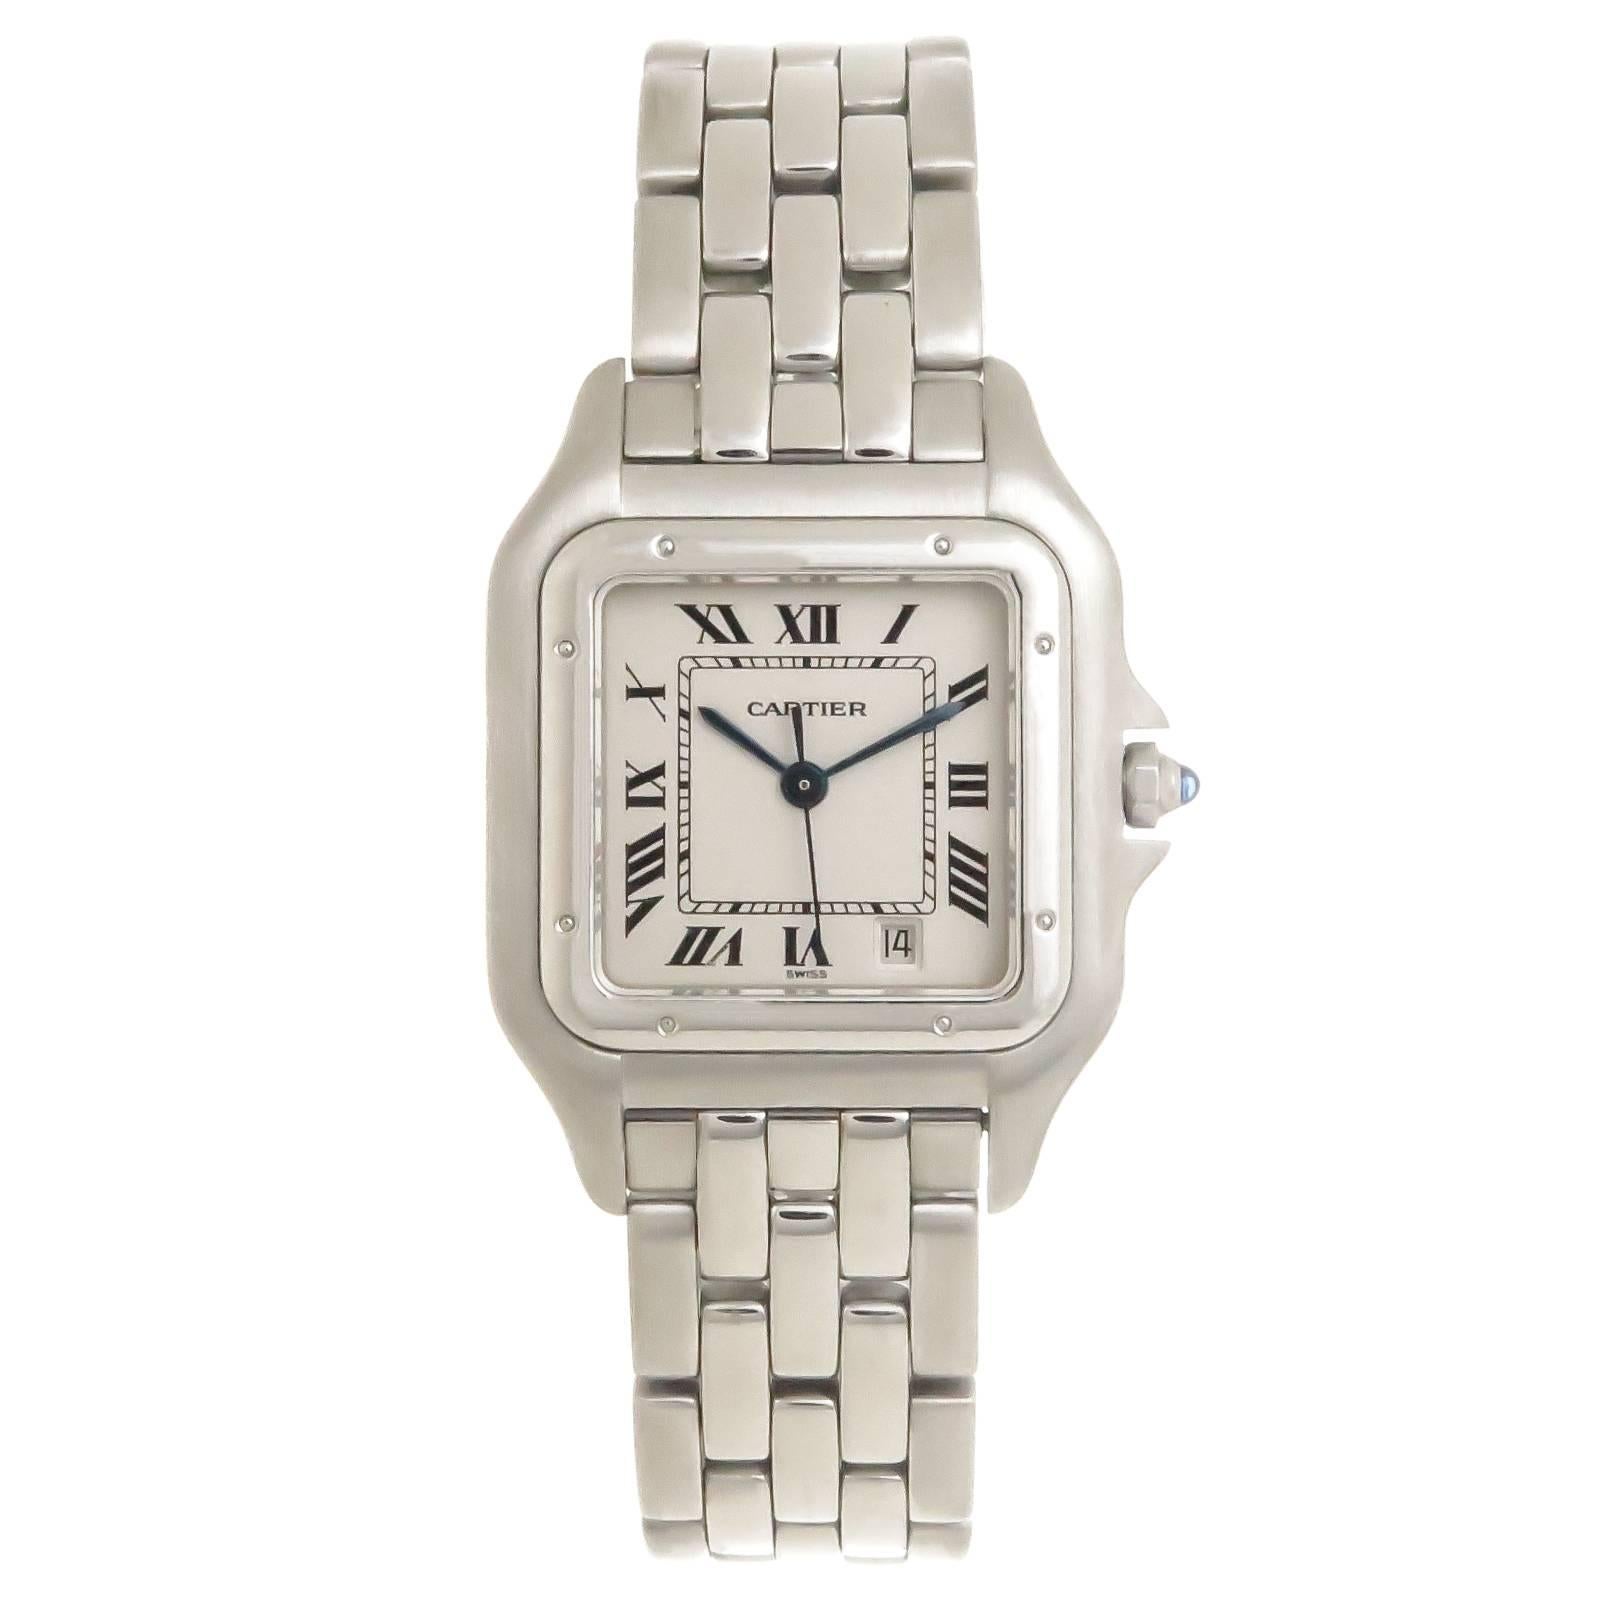 Cartier Stainless Steel Panthere Mid-Size Quartz Wristwatch